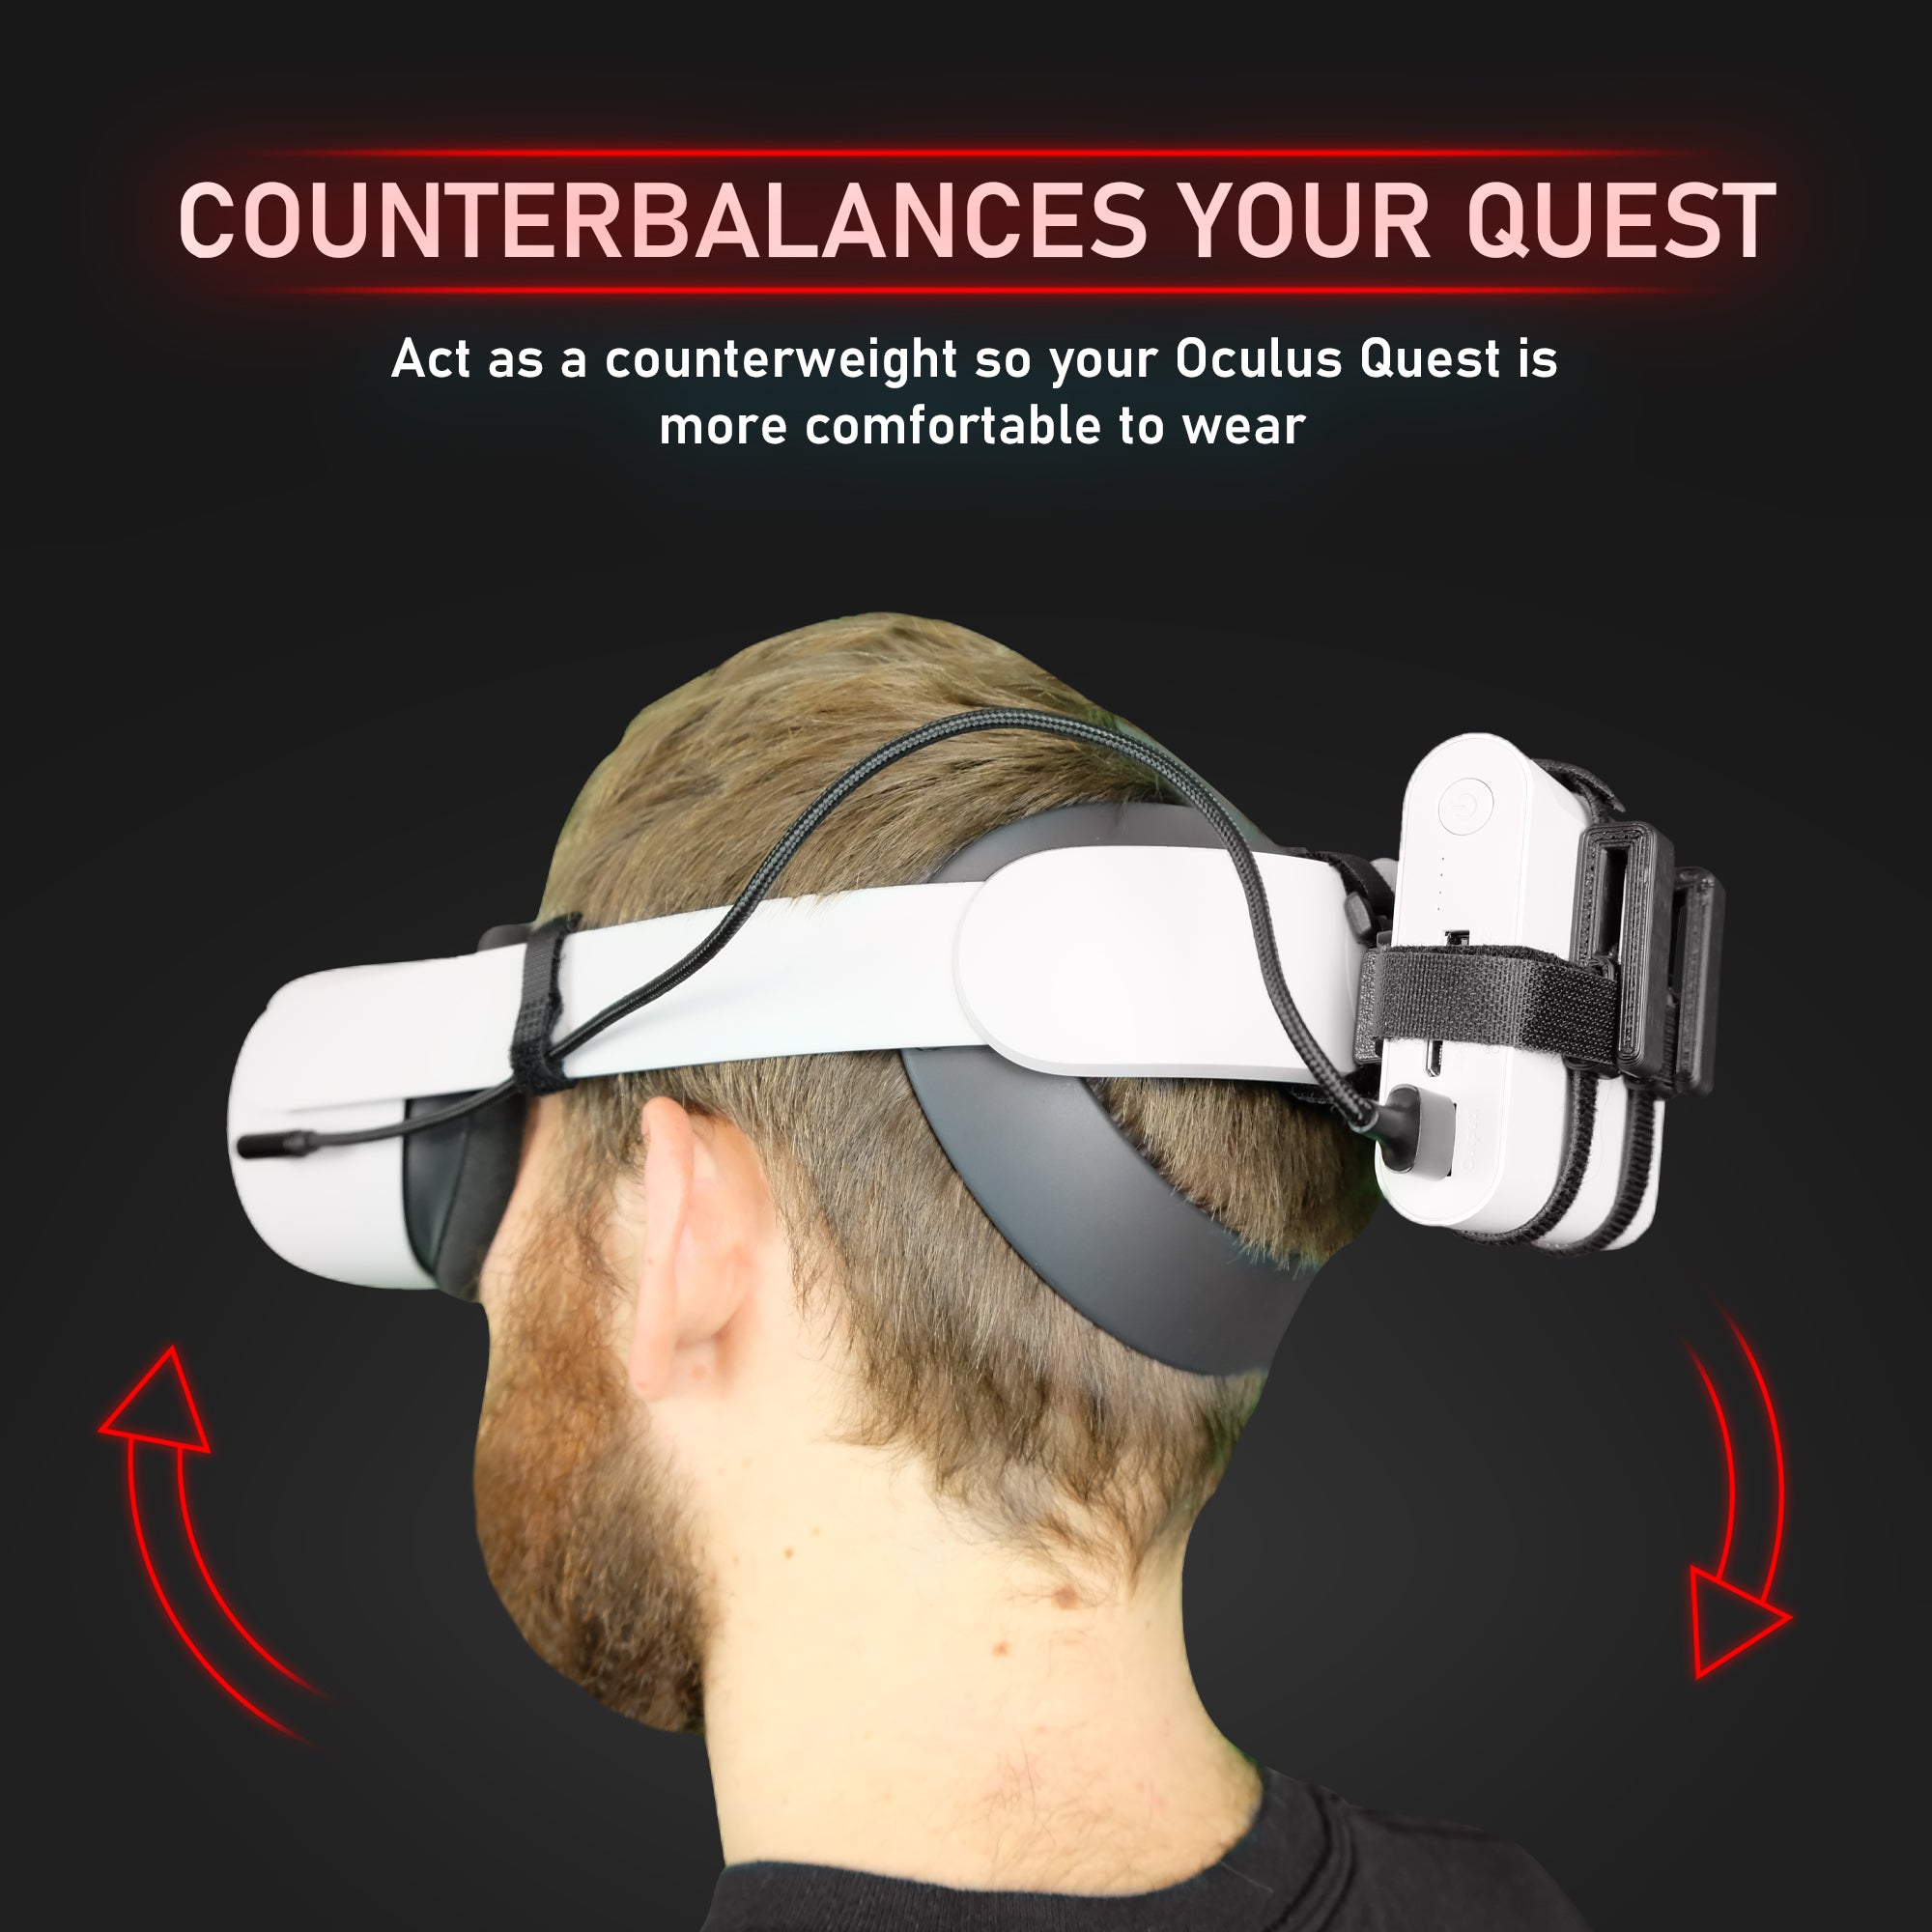 Counterbalances your Quest. Act as a counterweight so your oculus quest is more comfortable to wear. shows headsets being counterbalanced